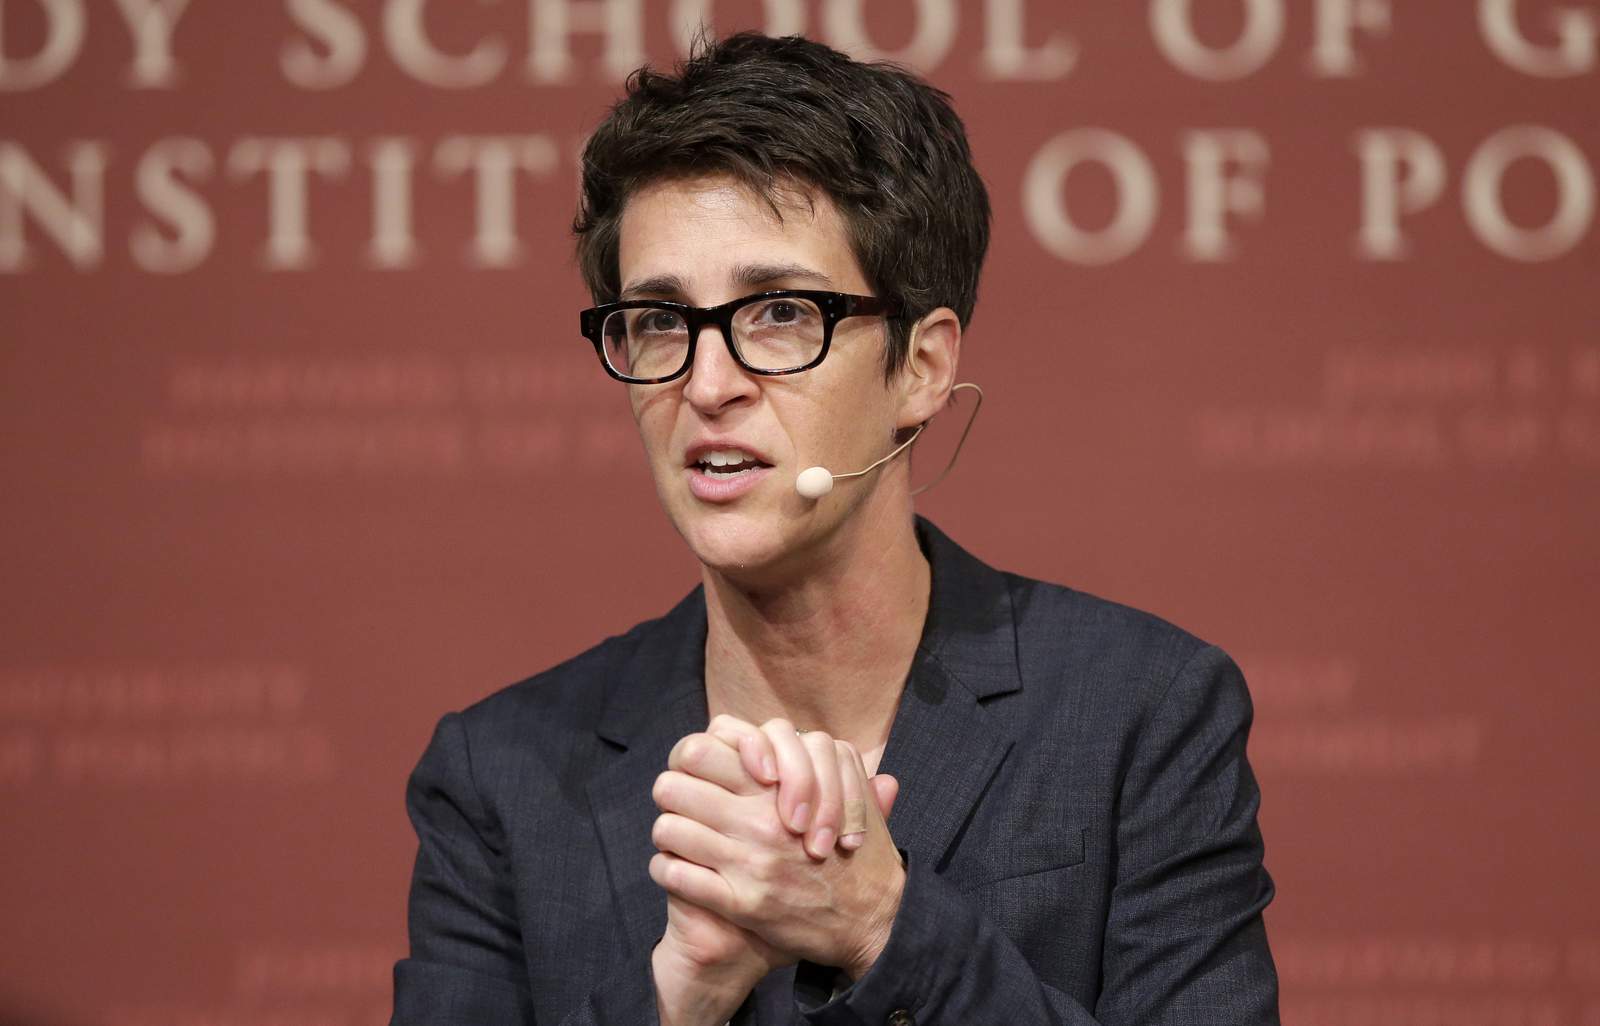 Rachel Maddow and Mary Trump make formidable TV combination